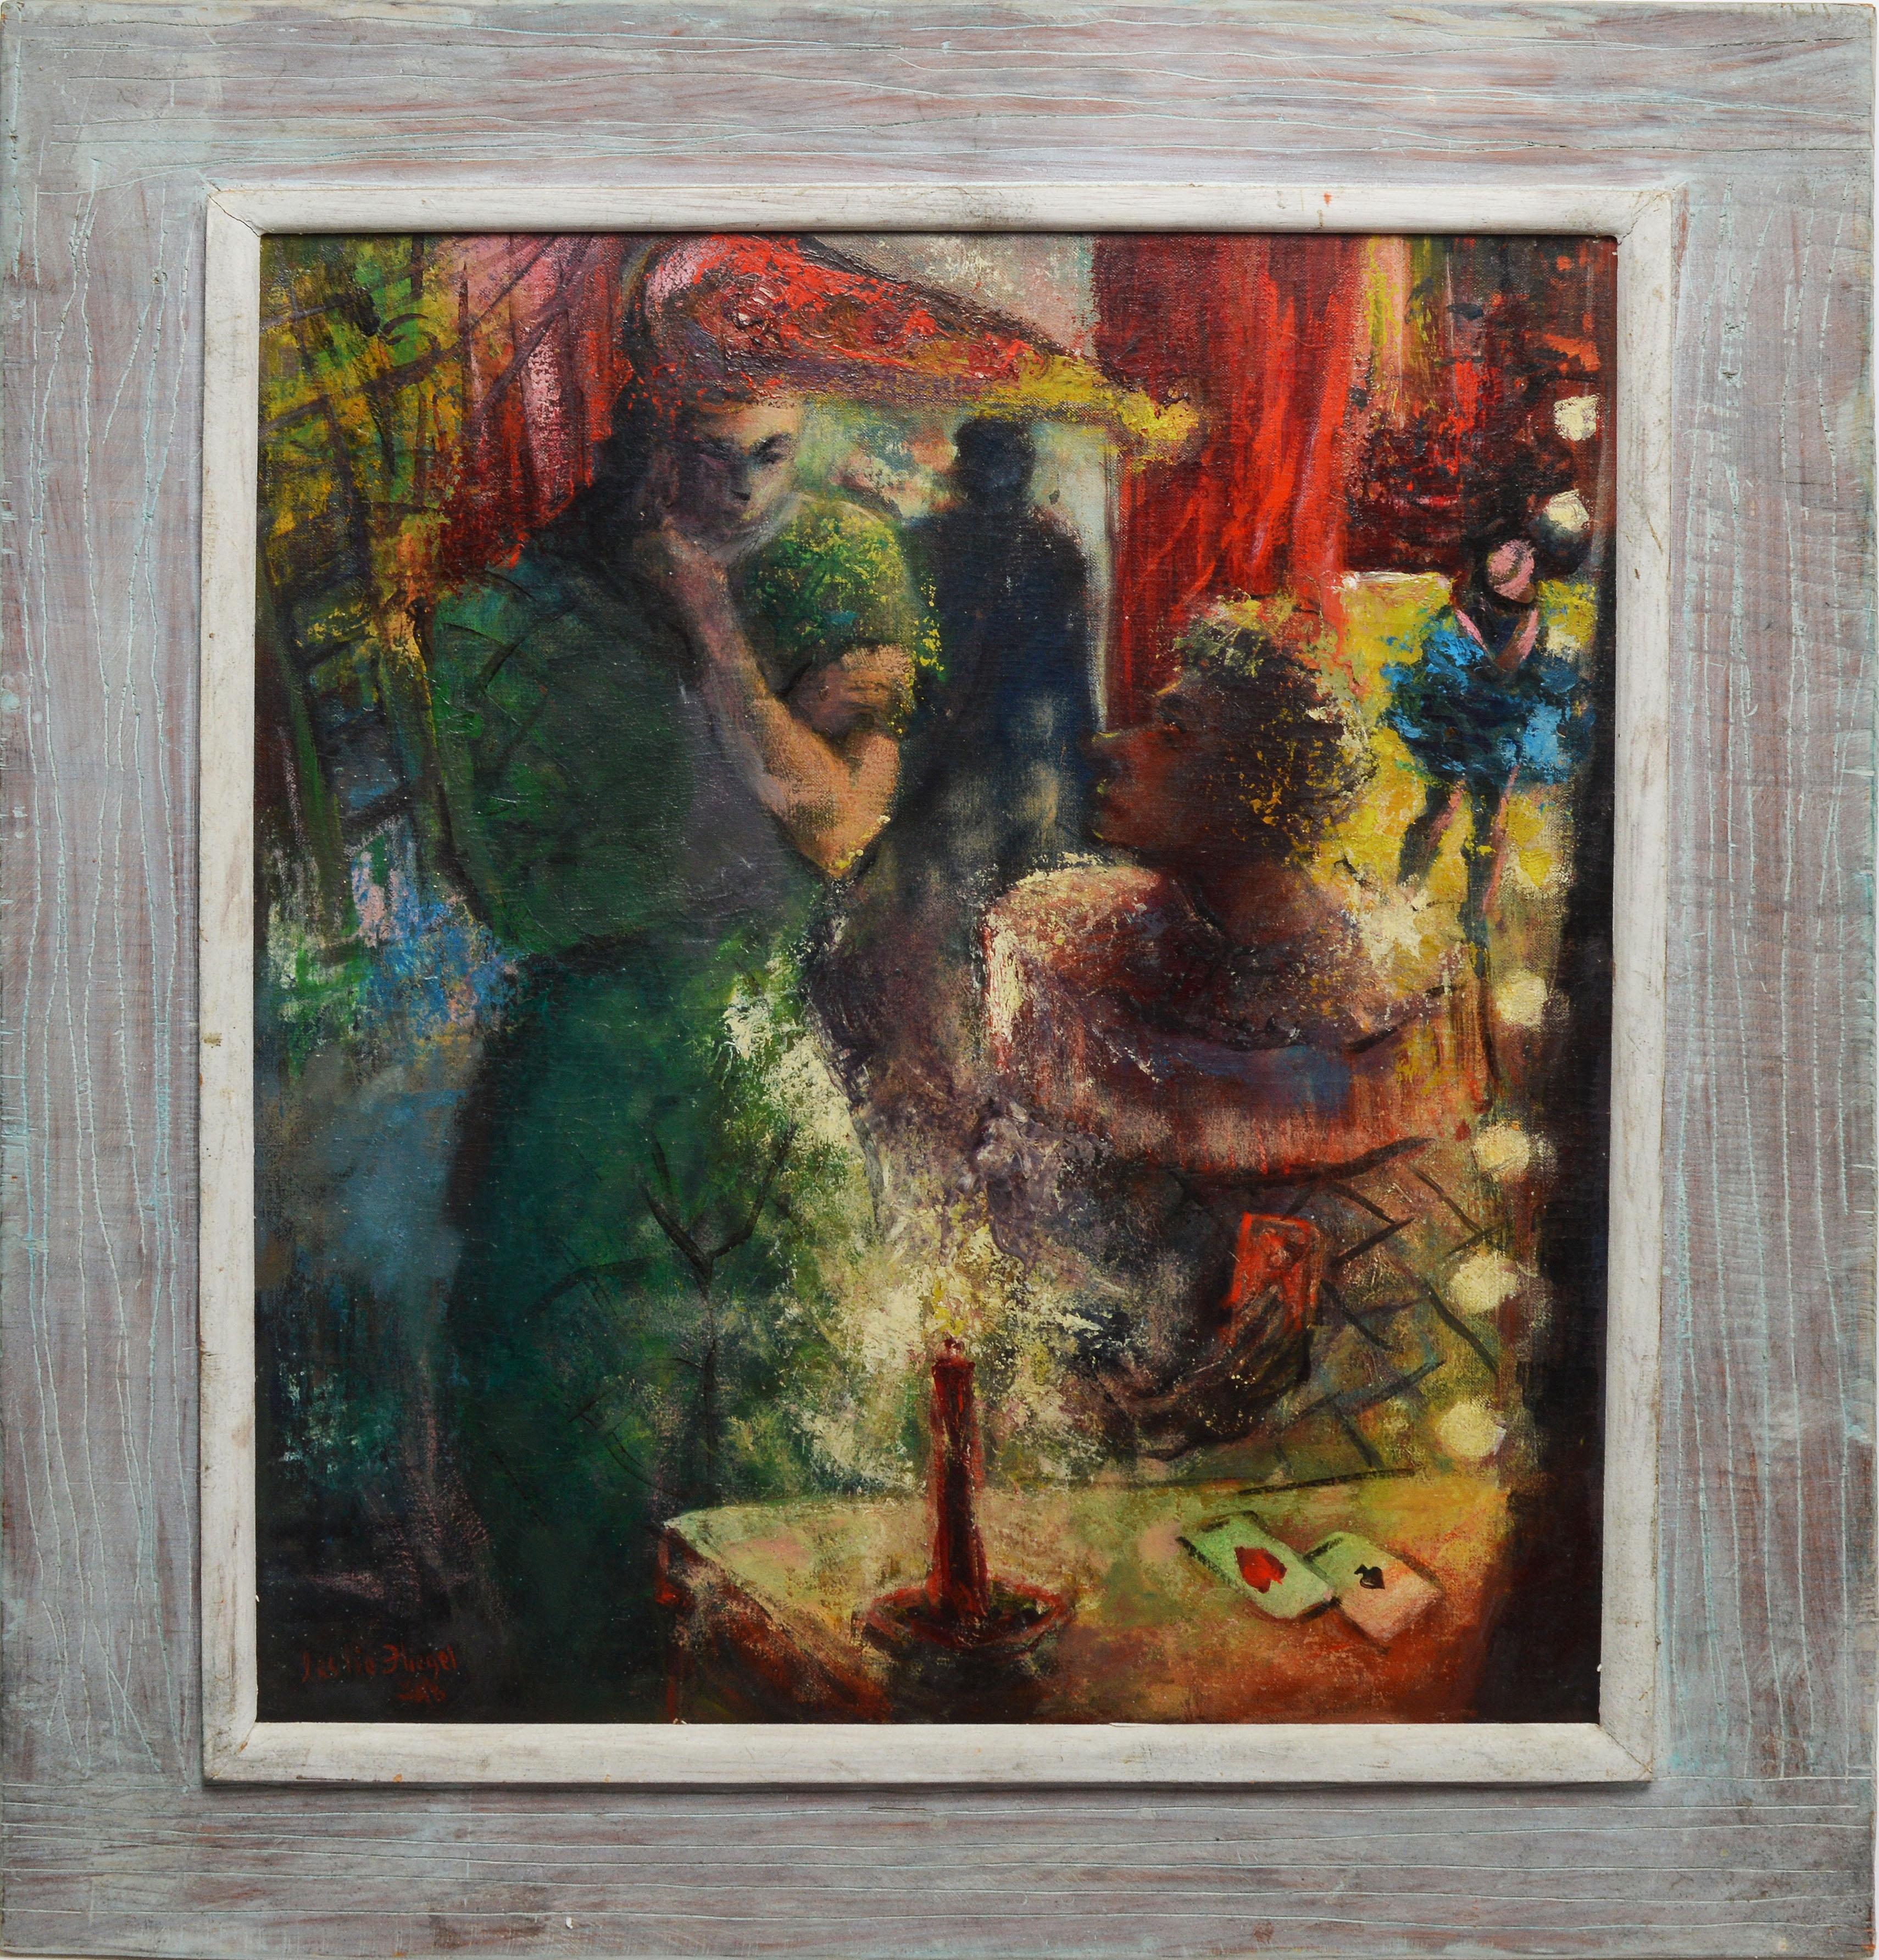 The Fortune Teller by Leslie Hiegel Antique American Modernist Oil Painting 1